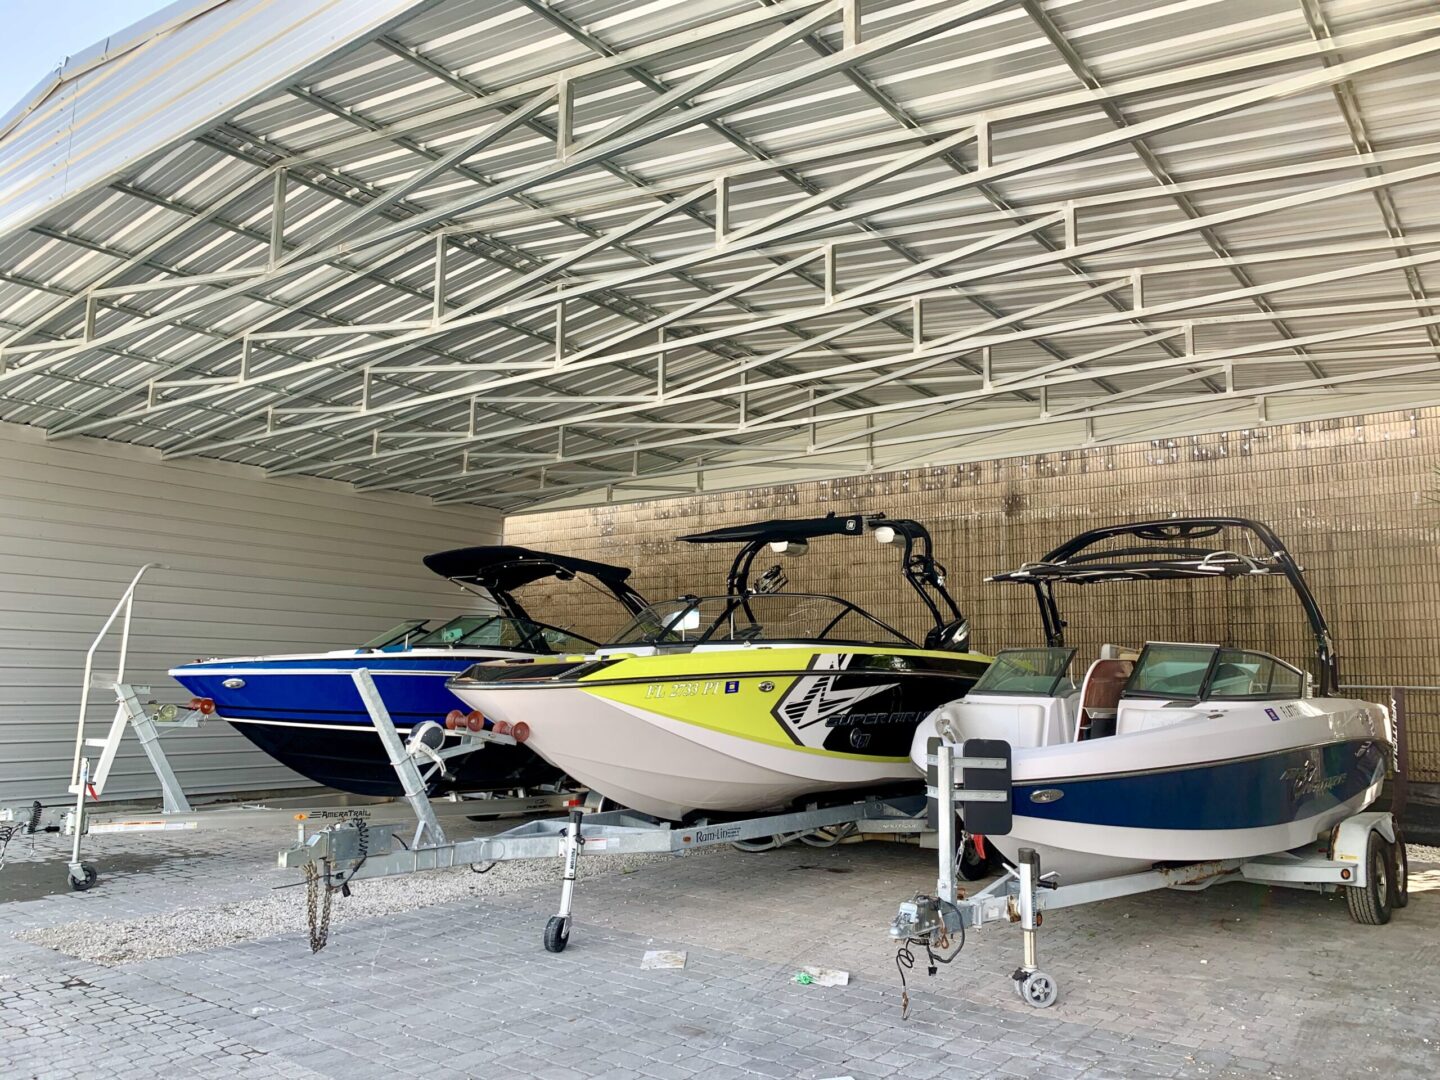 A group of boats parked in a building.